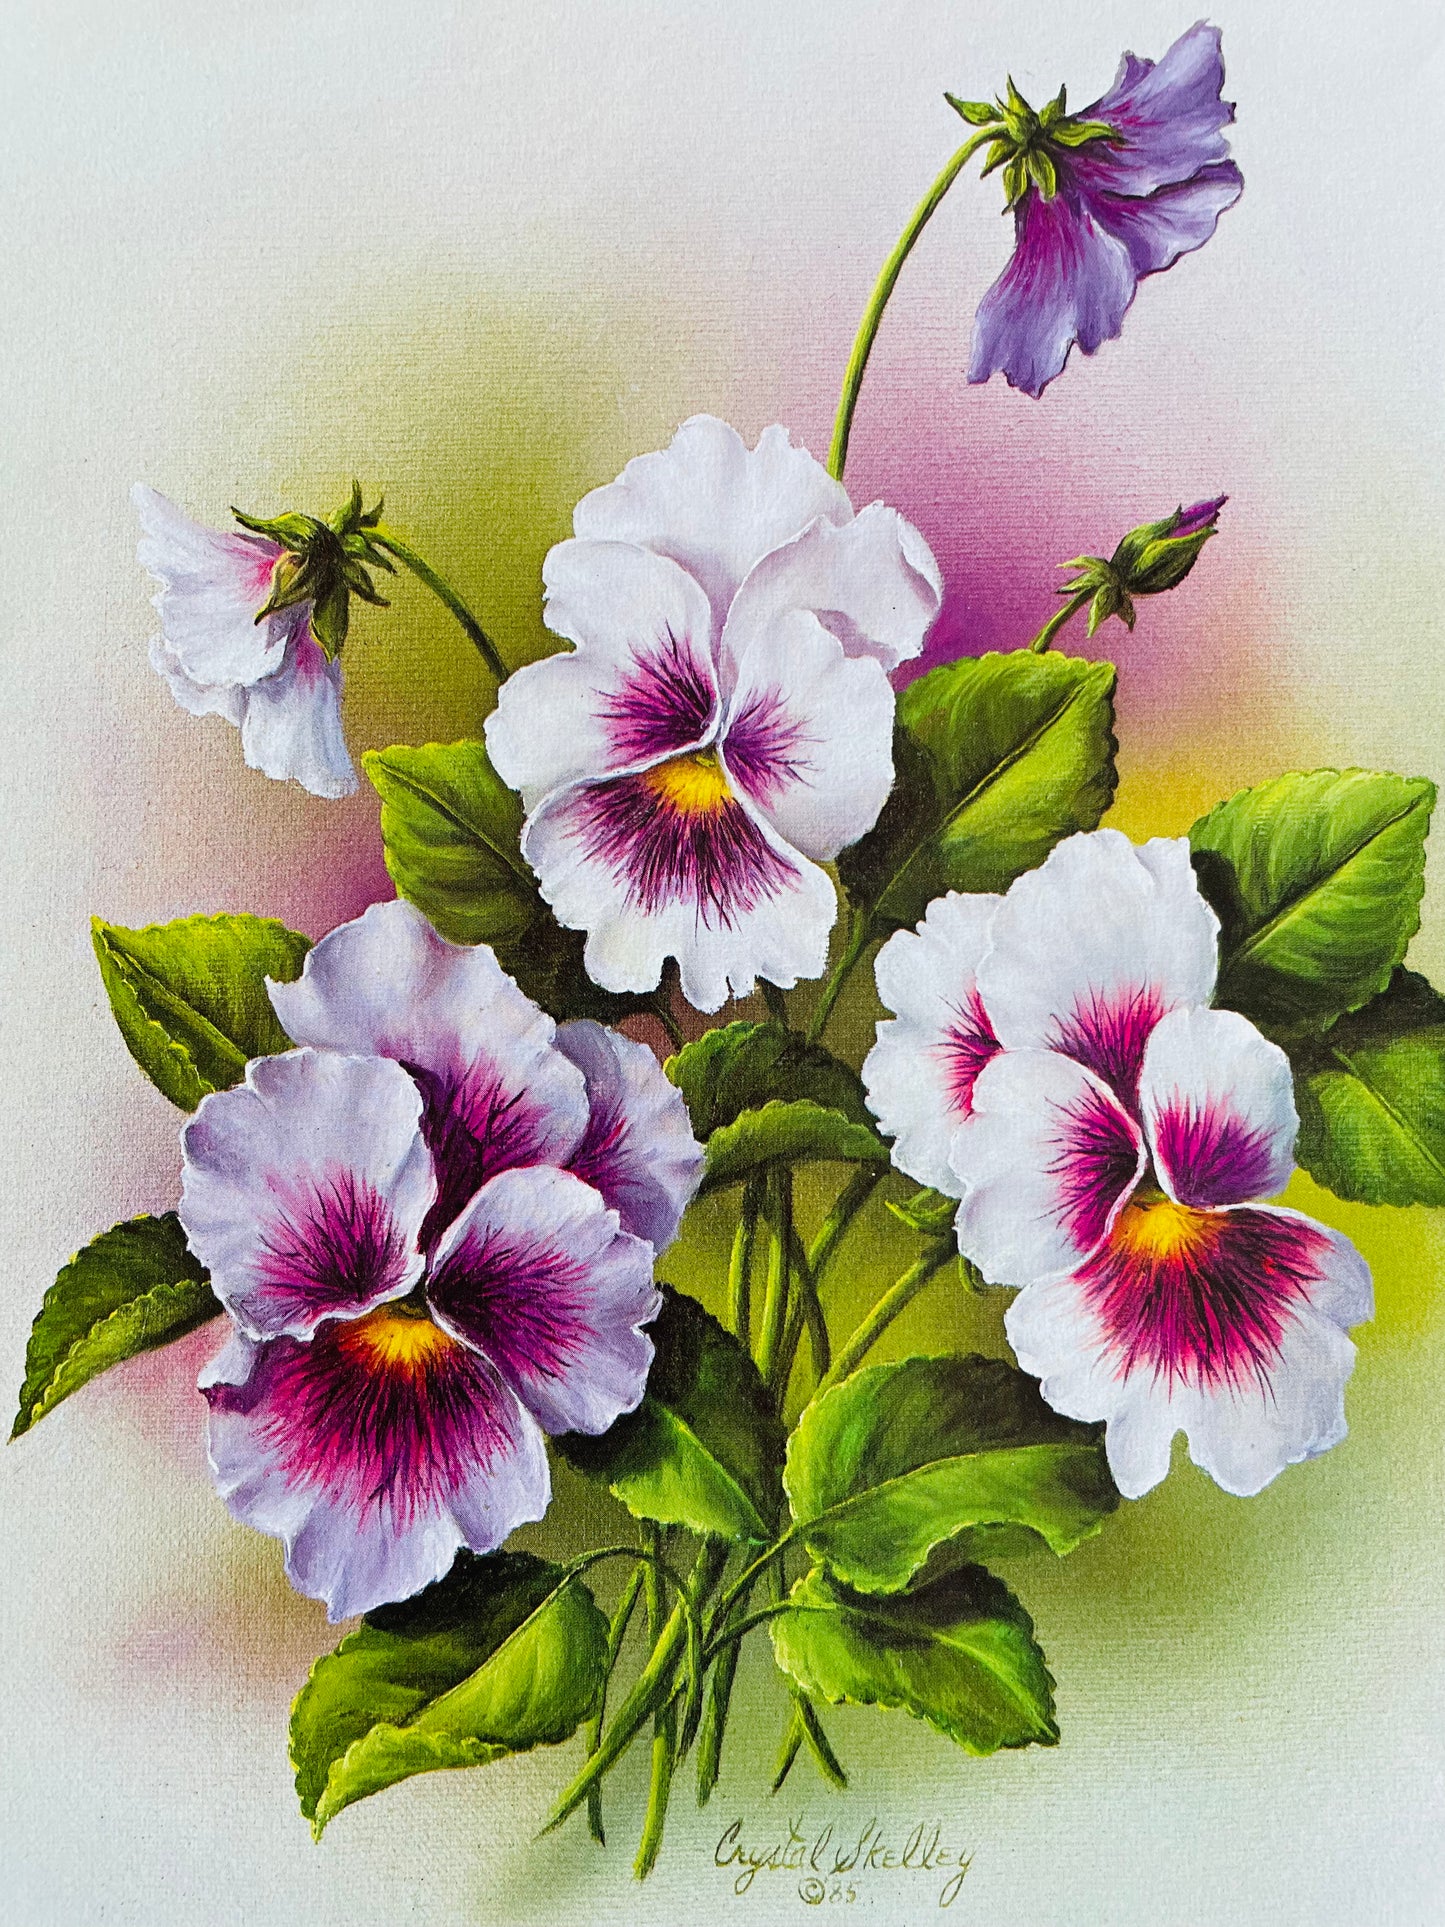 Pansies by Crystal Skelley (1986) Geme Art Inc. - Floral Lithograph Print Ready for Framing!